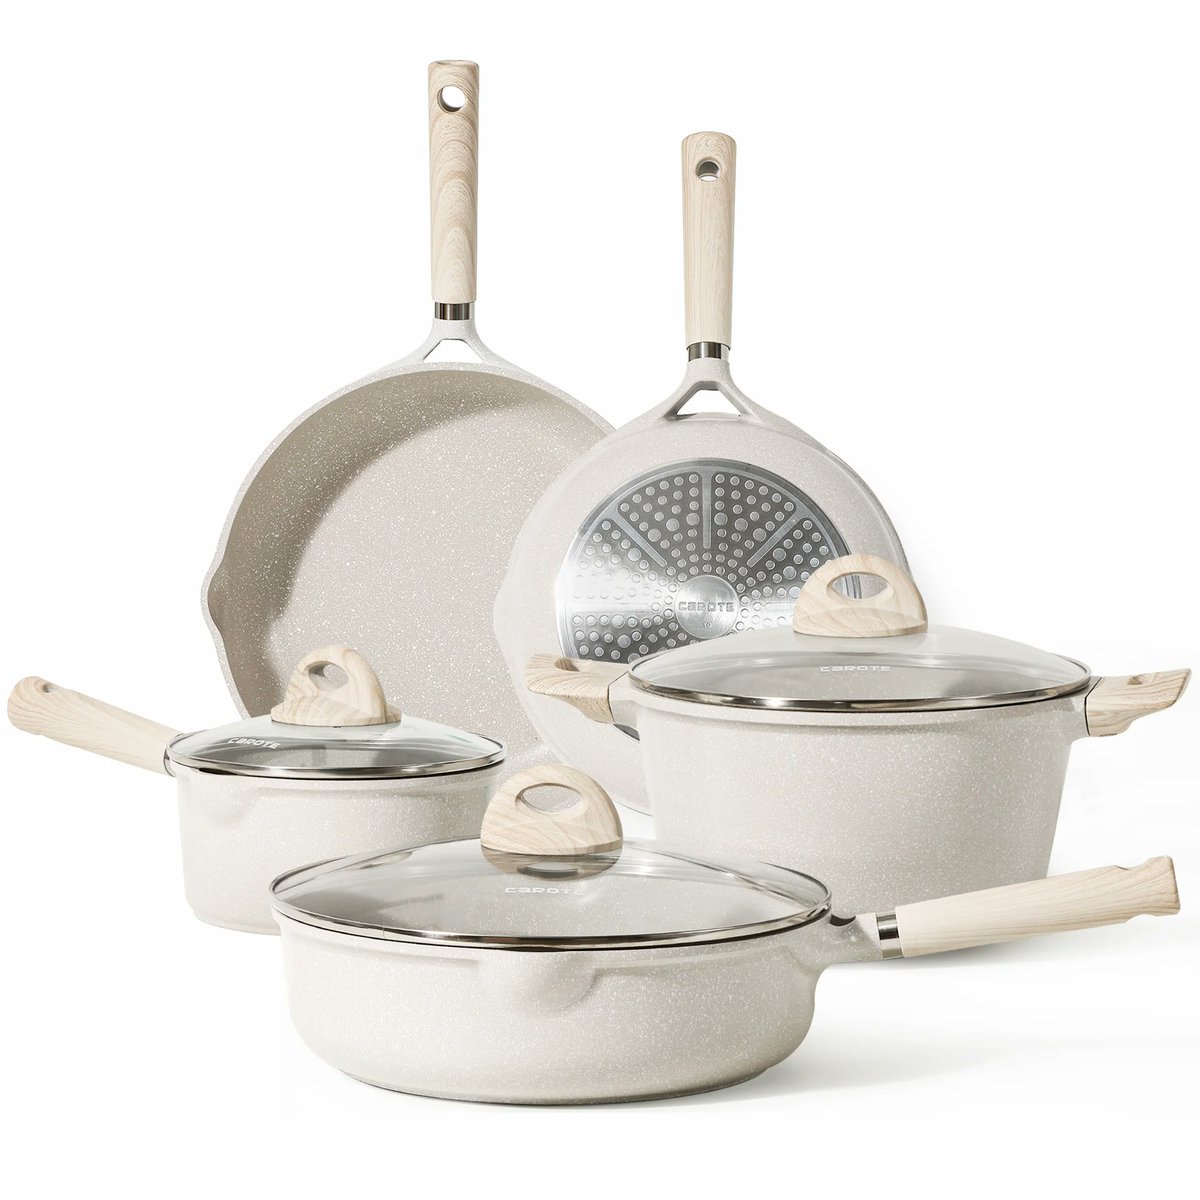 Carote Nonstick Pots and Pans Set, 8 Pcs Induction Kitchen Cookware Sets -- Save over $175 -- JUST $64.98 goto.walmart.com/c/2522200/5657… #carote #carotedeals #carotecookware #cookware #cookwaredeals #cookwaredeal #cookwareset #cookwaresets #kitchencookware #potsandpans #pots #pans